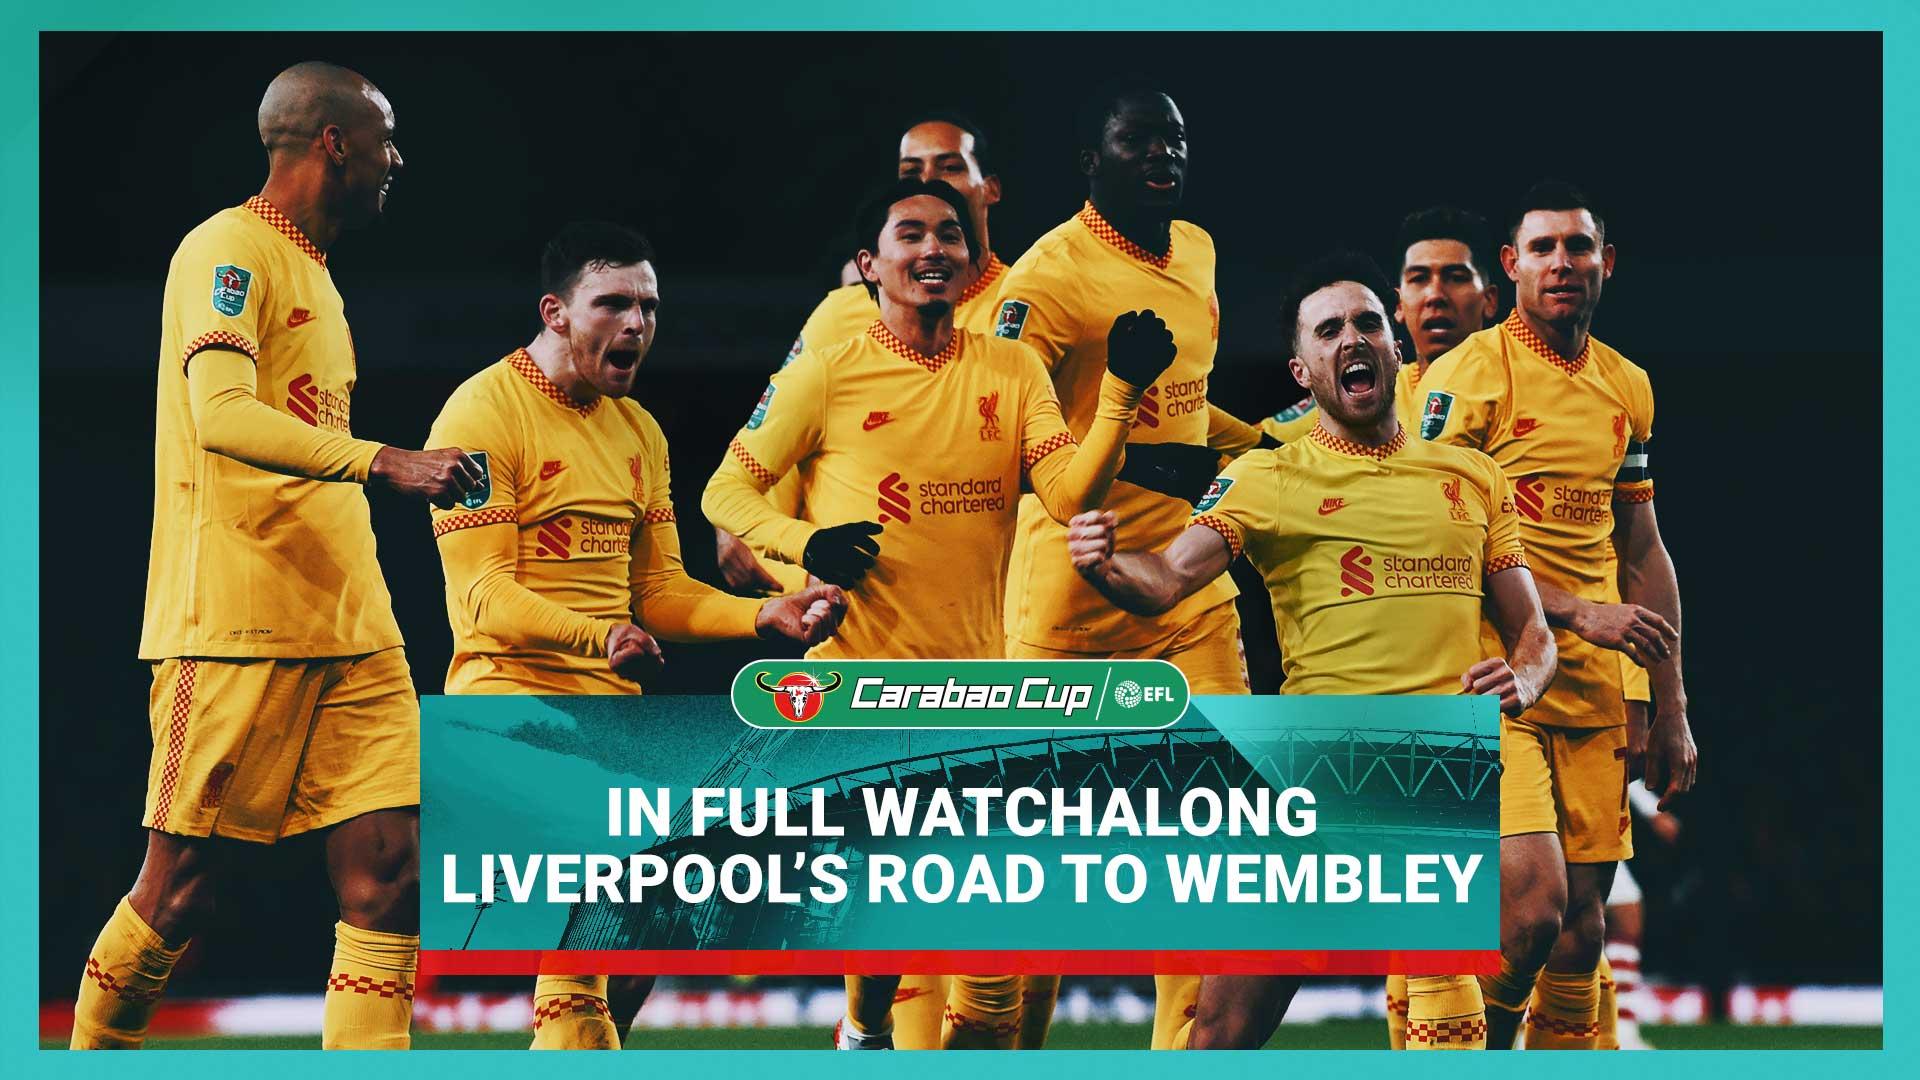 Watchalong Every game in Liverpools journey to Wembley